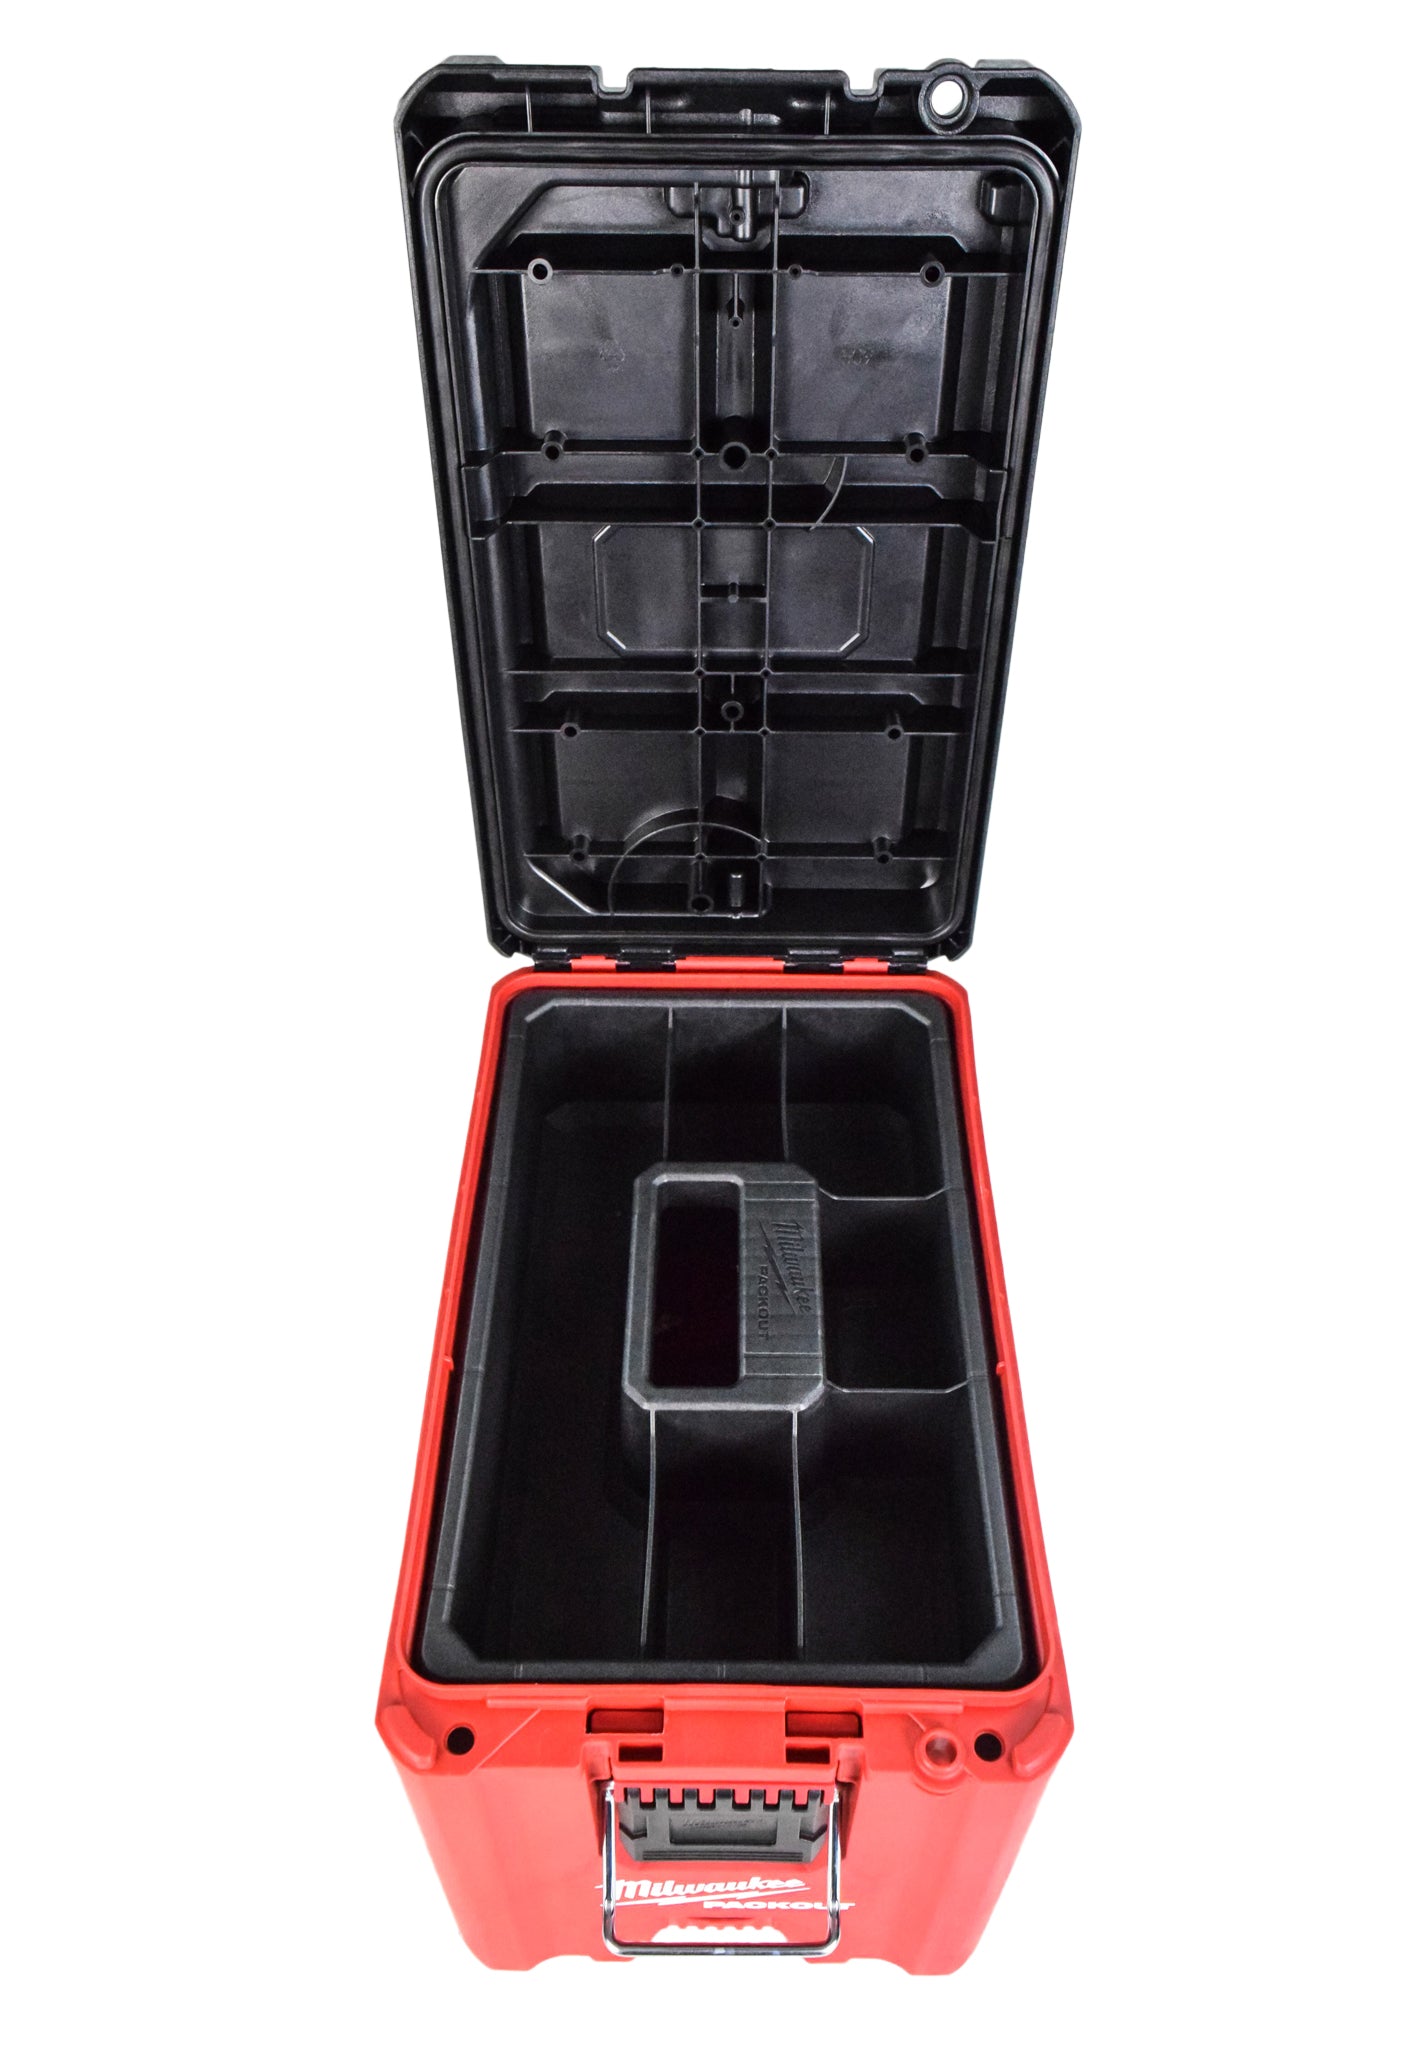 Milwaukee 48-22-8422 Heavy Duty PACKOUT 10-inch Black/Red Compact Tool Box